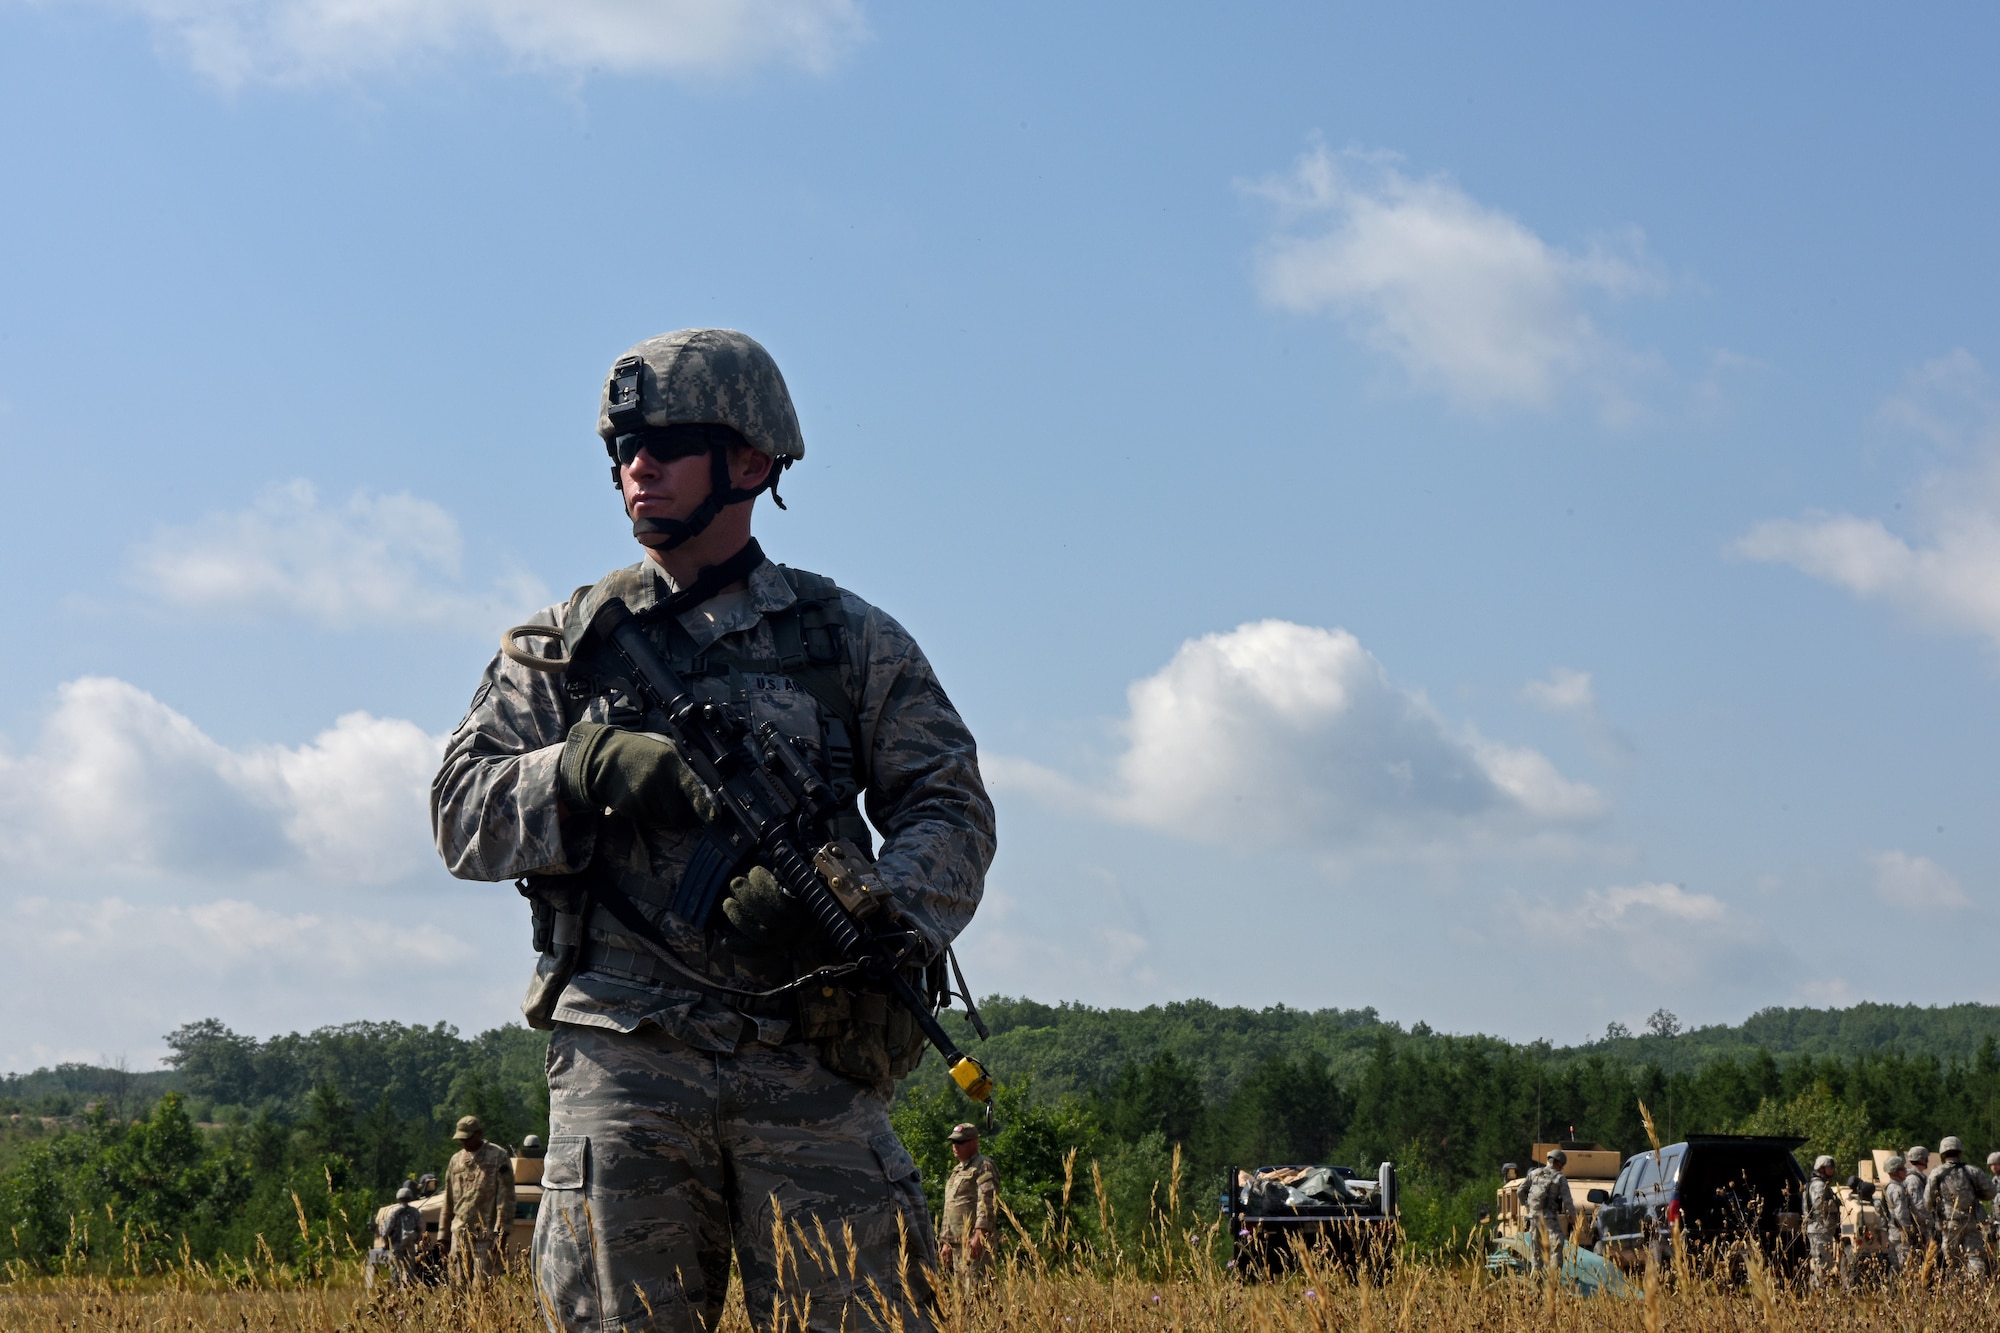 U.S. Air Force Senior Airman Cody Martin, with the 121st Security Forces Squadron, establishes security while 121st SFS Airmen set-up a Forward Operating Base during a training exercise Aug. 17, 2015 at Camp Grayling Joint Maneuver Training Center, Mich. The Airmen spent three days in a simulated deployed environment as a part of their annual training. (U.S. Air National Guard photo by Airman Ashley Williams/Released)